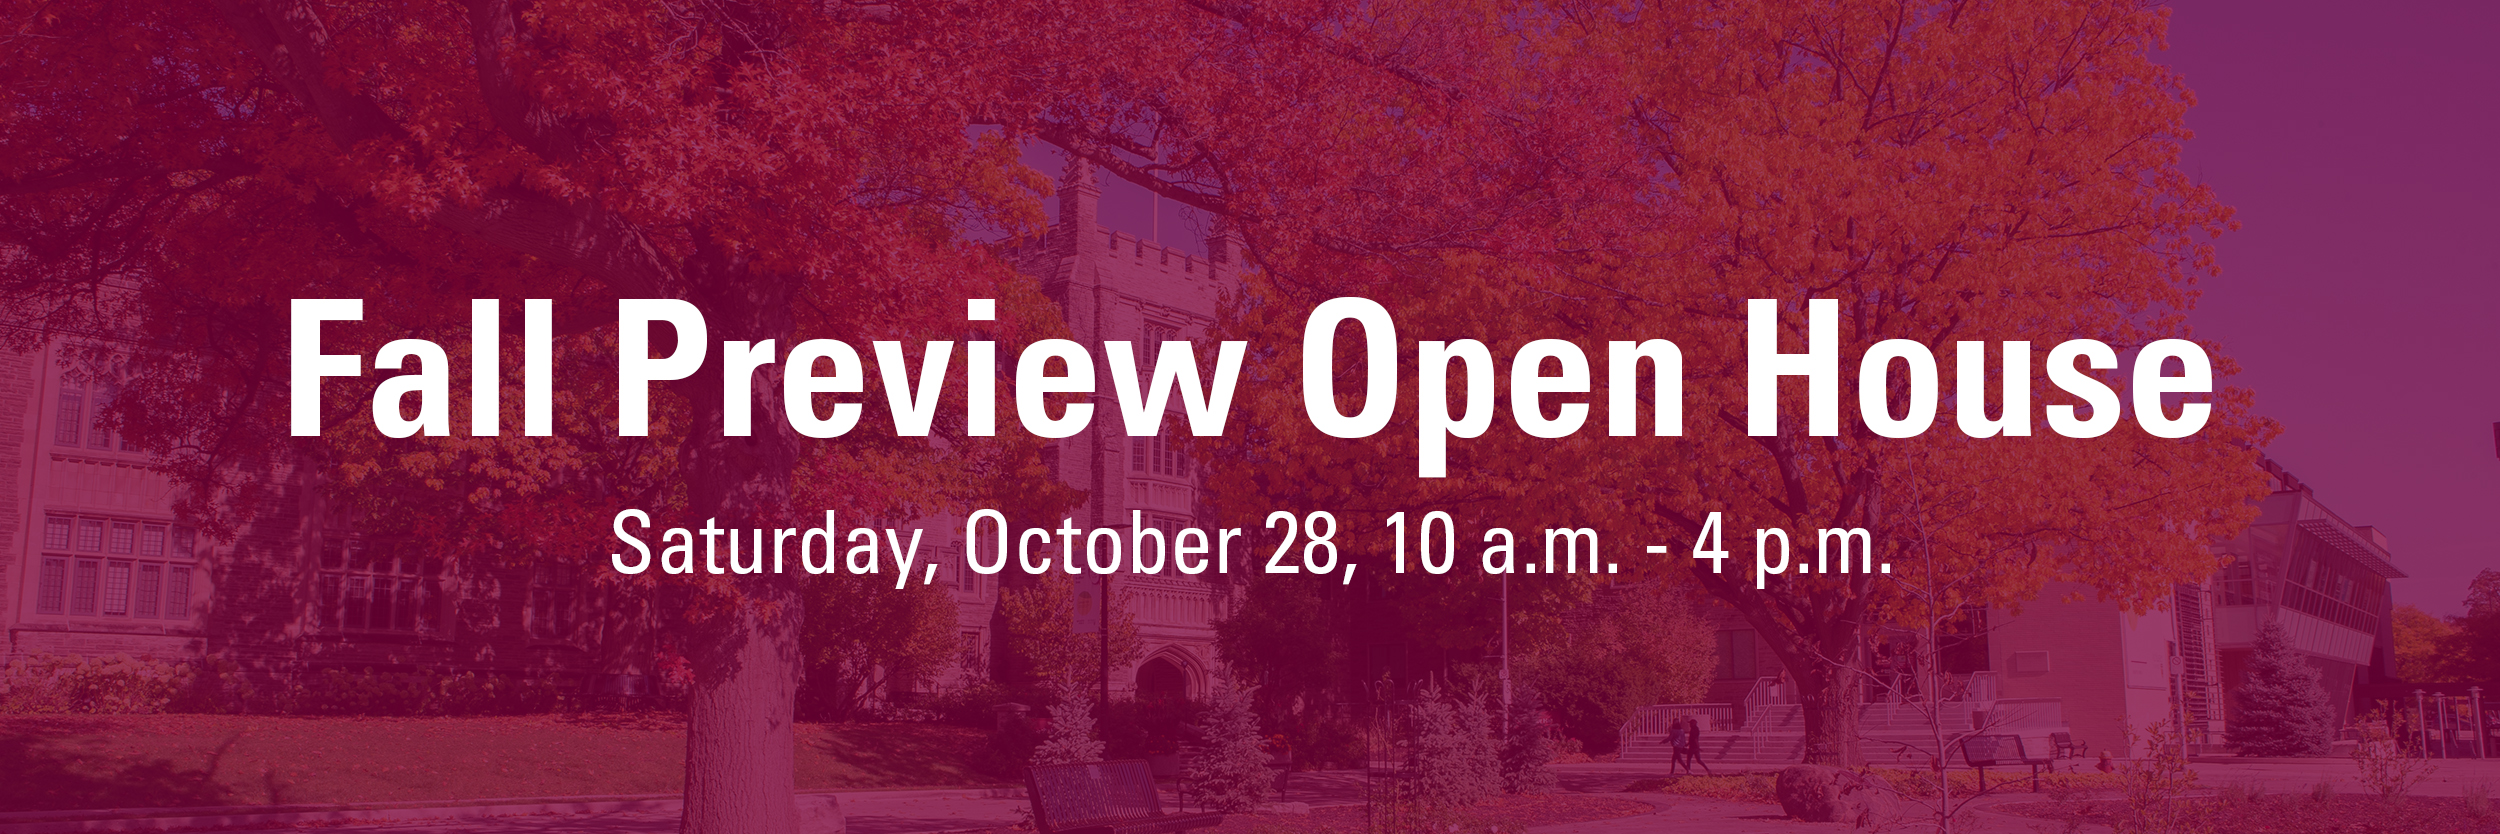 A graphic of the Fall Preview open house event happening on Saturday, October 28, from 10 am to 4pm.